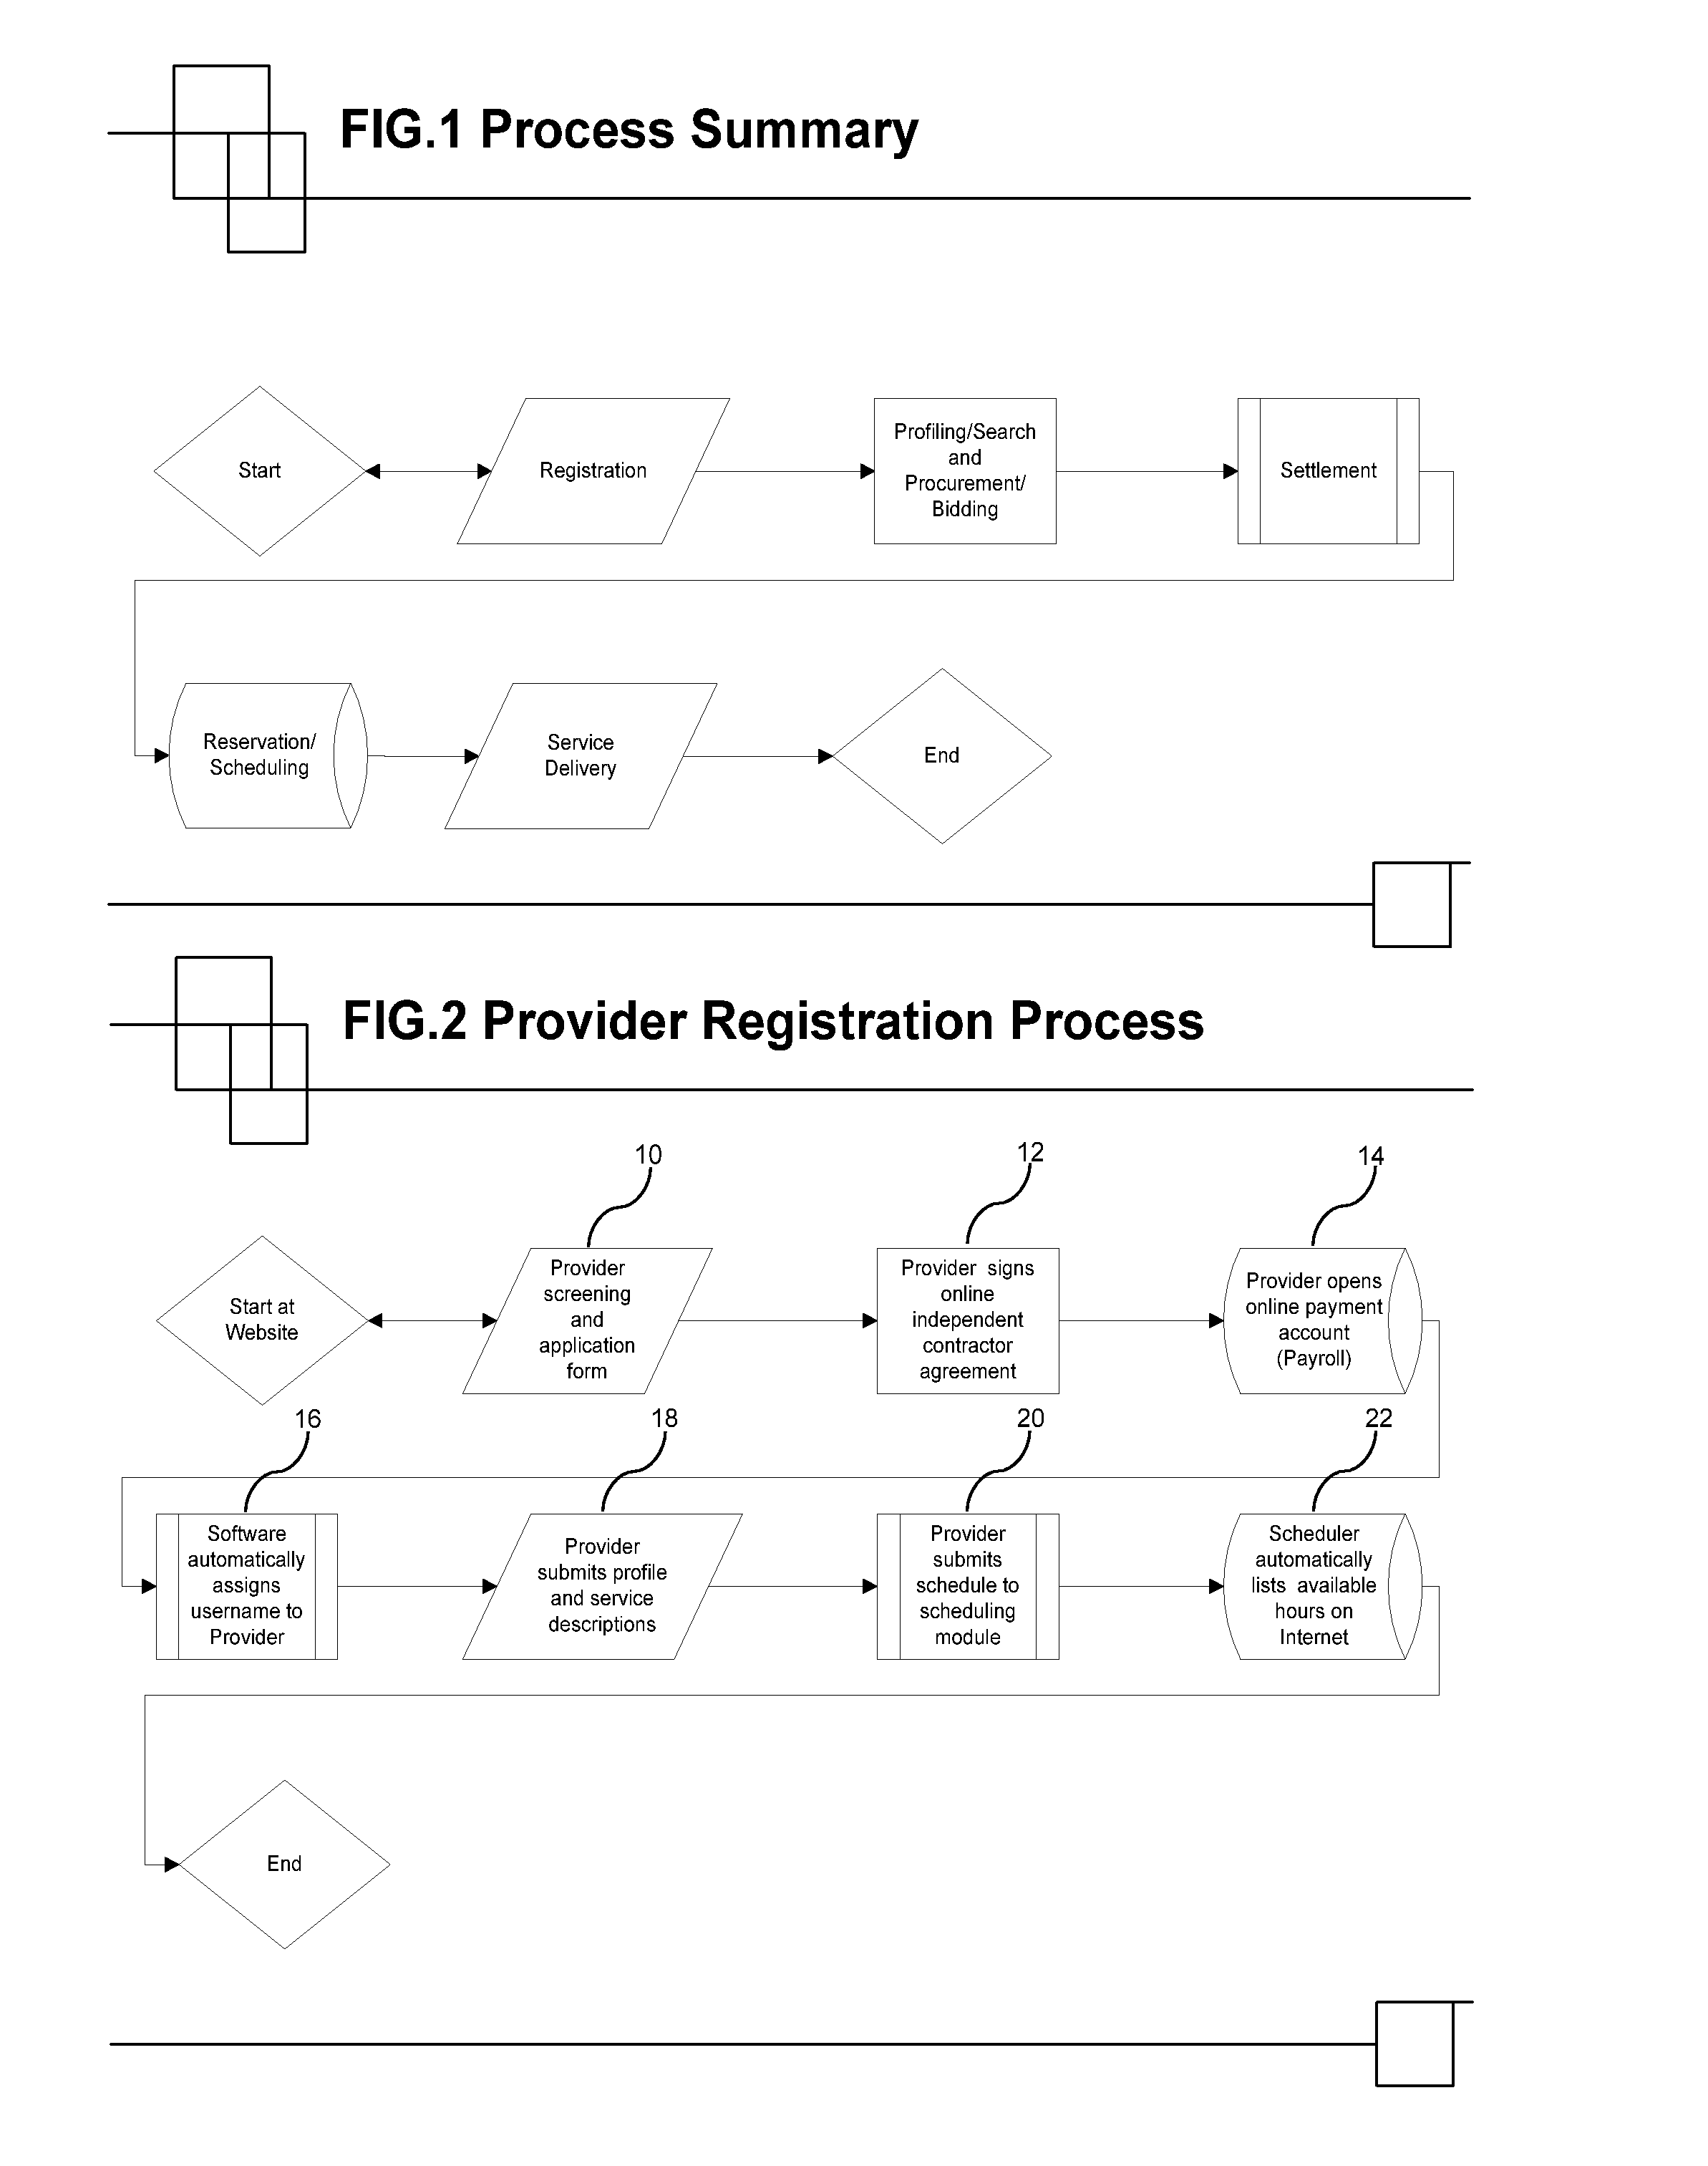 Real-time Professional Services Facilitator system and method